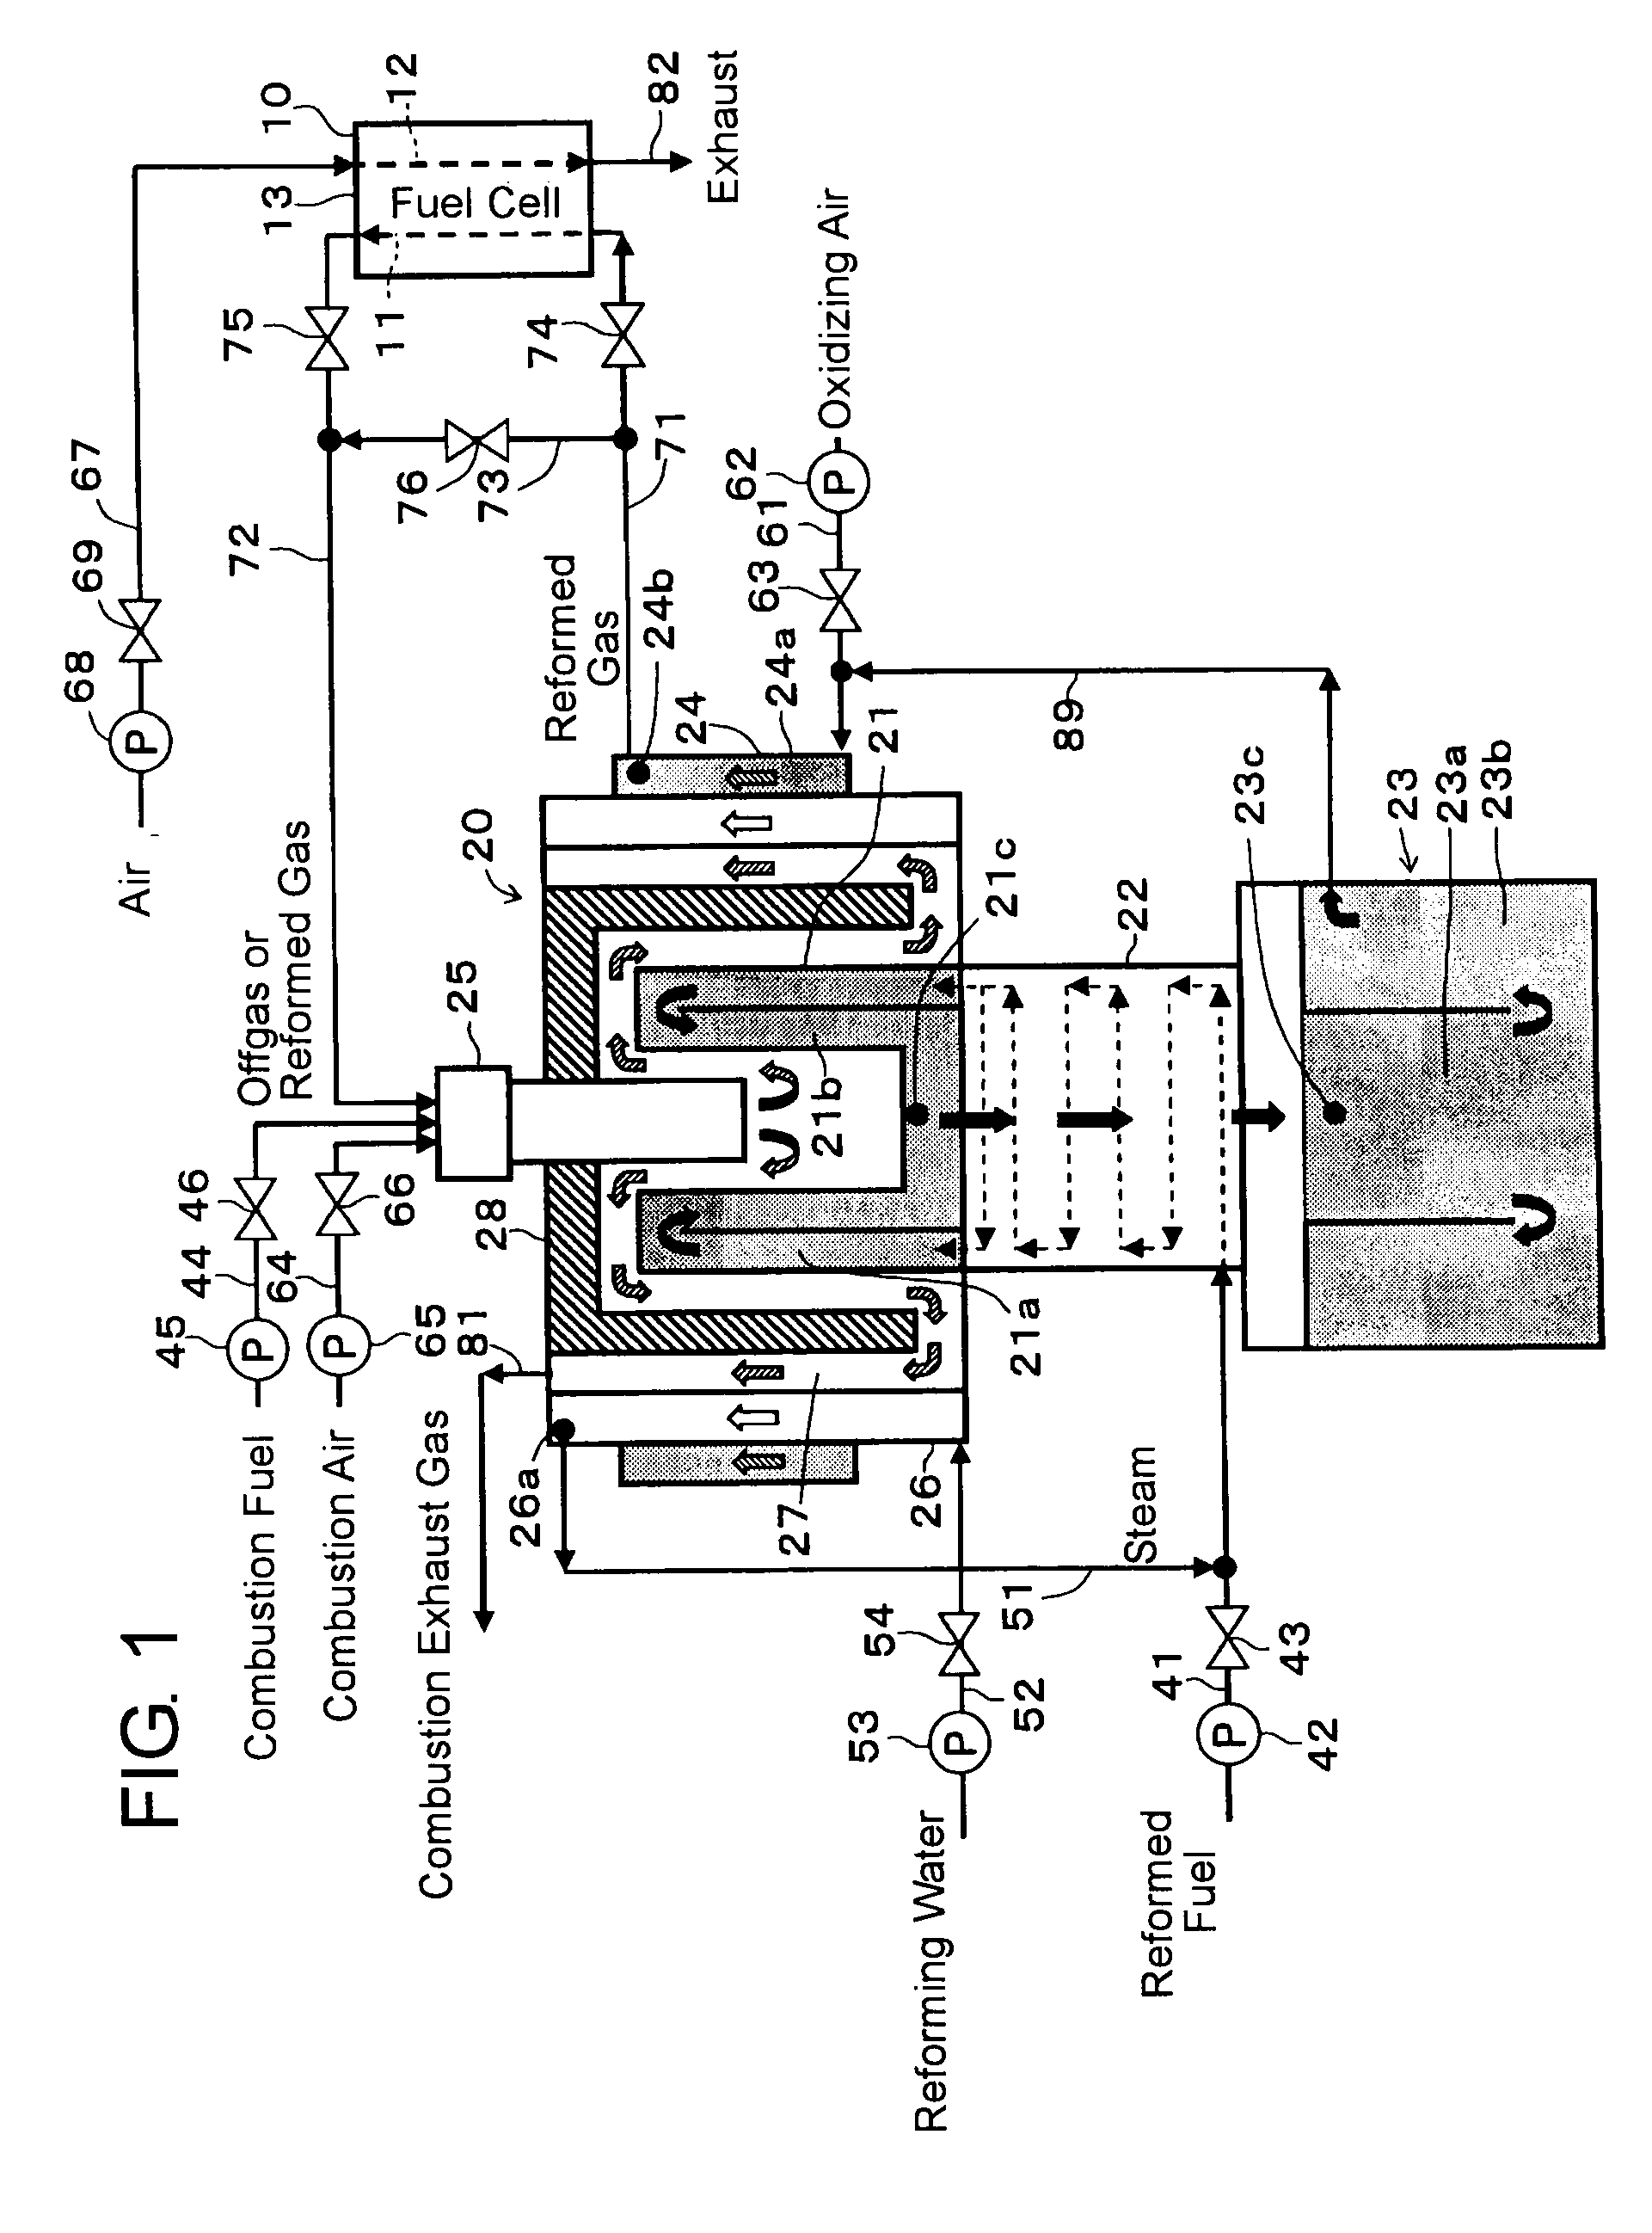 Reformer and fuel cell system incorporating the same